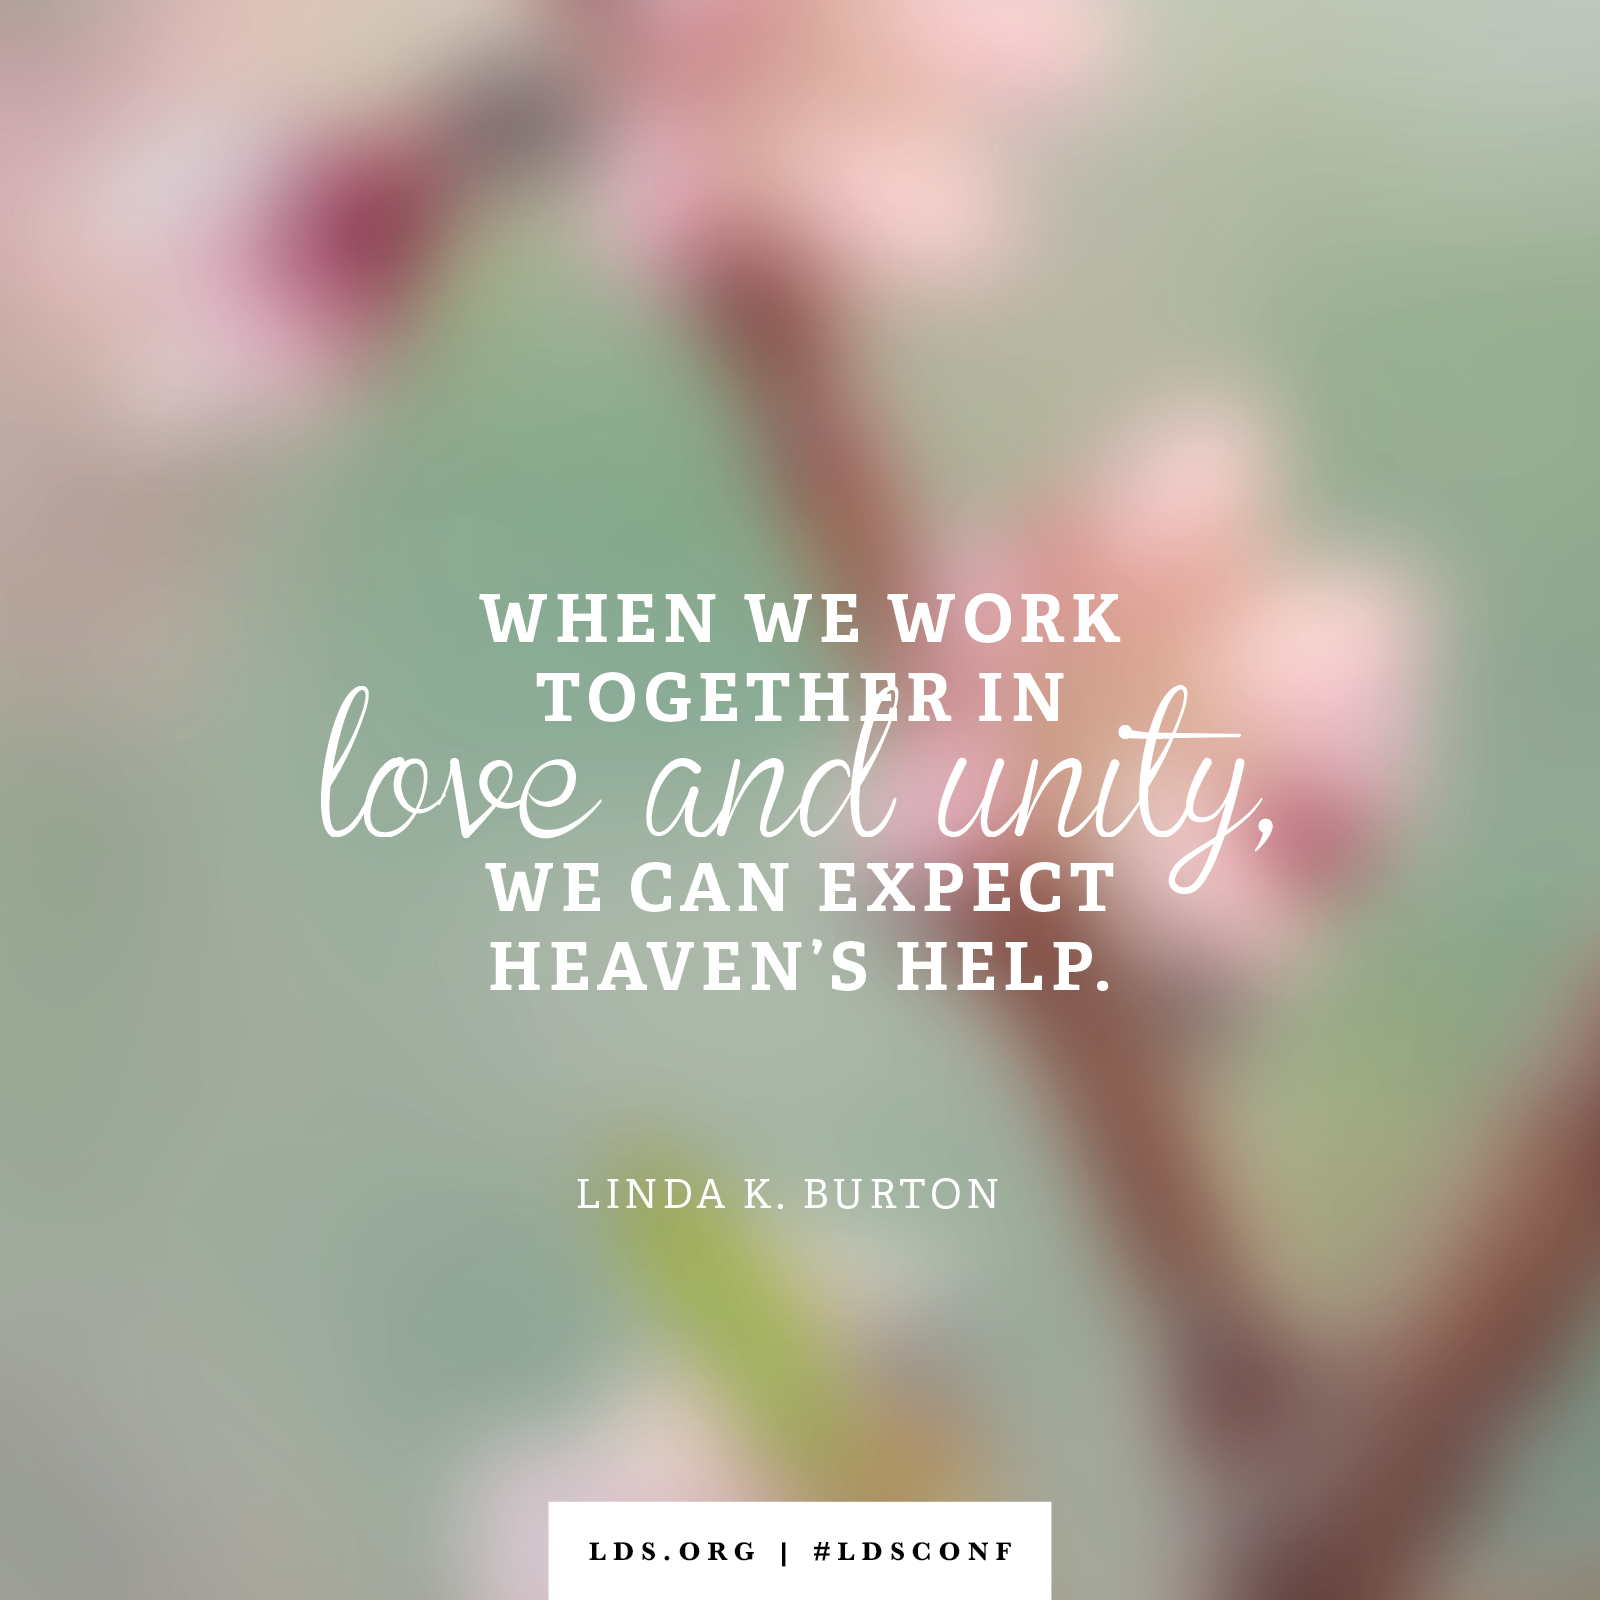 Lds Quote On Unity - HD Wallpaper 